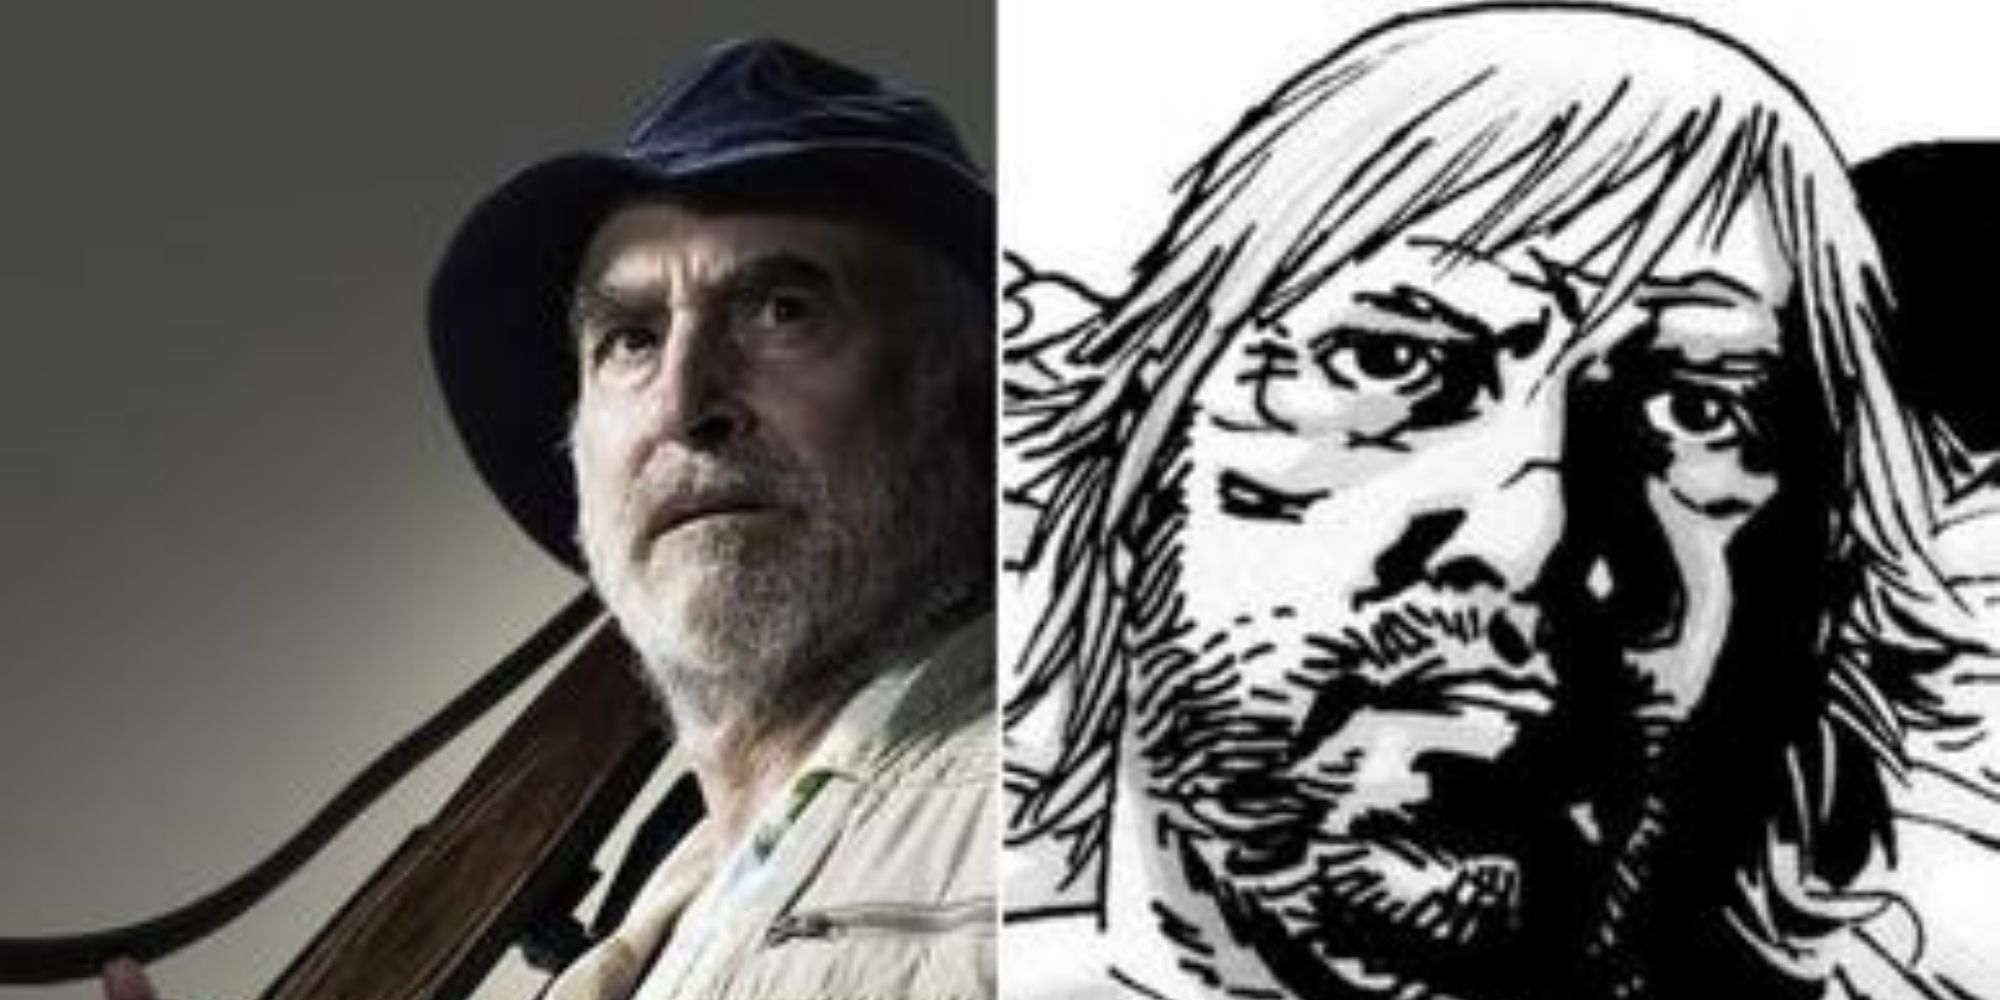 Split image of Dale Horvath's TV and comic book counterparts from The Walking Dead.